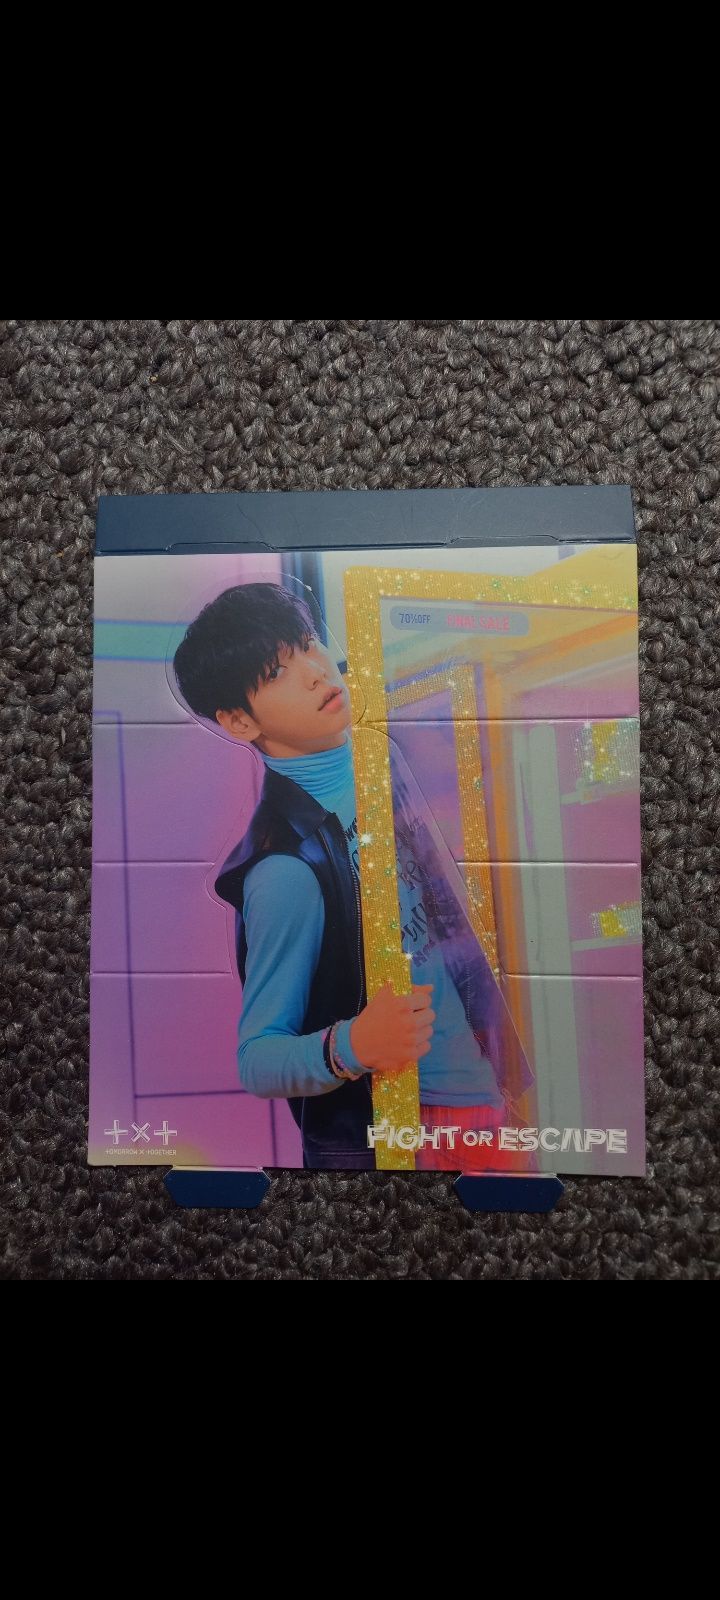 Soobin txt the chaos chapter fight or escape stand standee photocard c